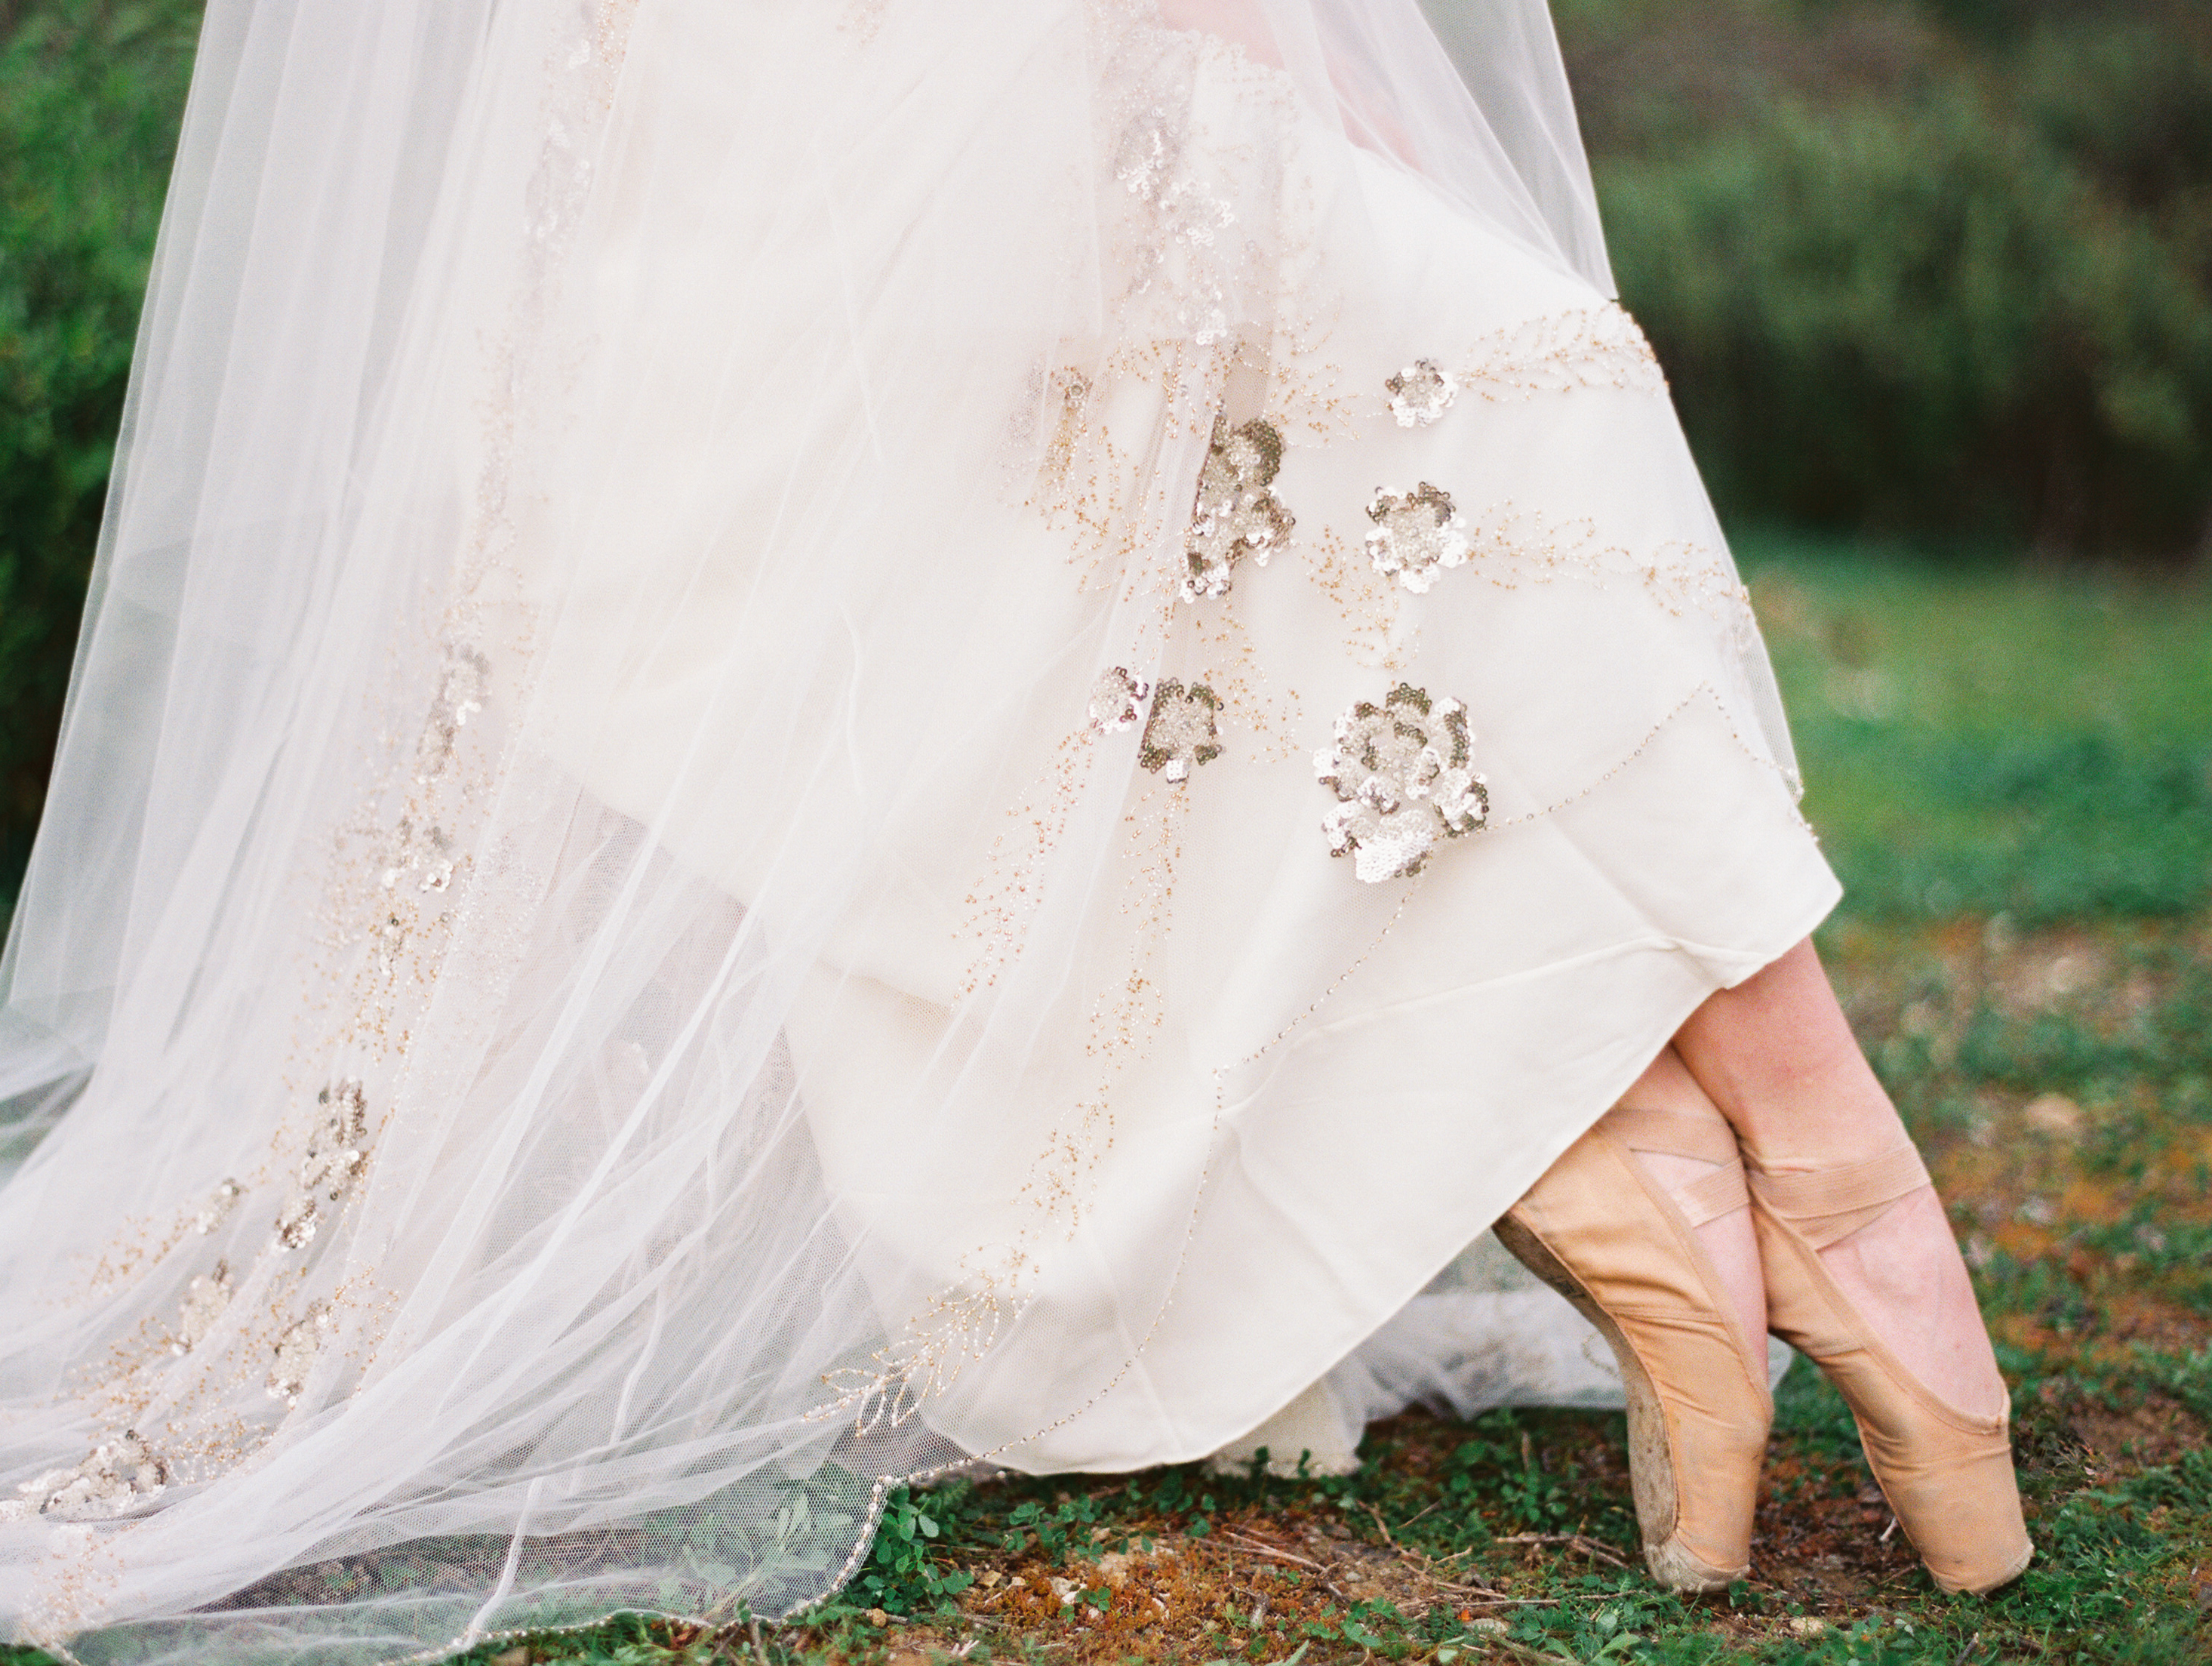 Ballet Wedding Inspiration by Mirelle Carmichael Photography - Jenny Packham Dress and Pointe Shoes